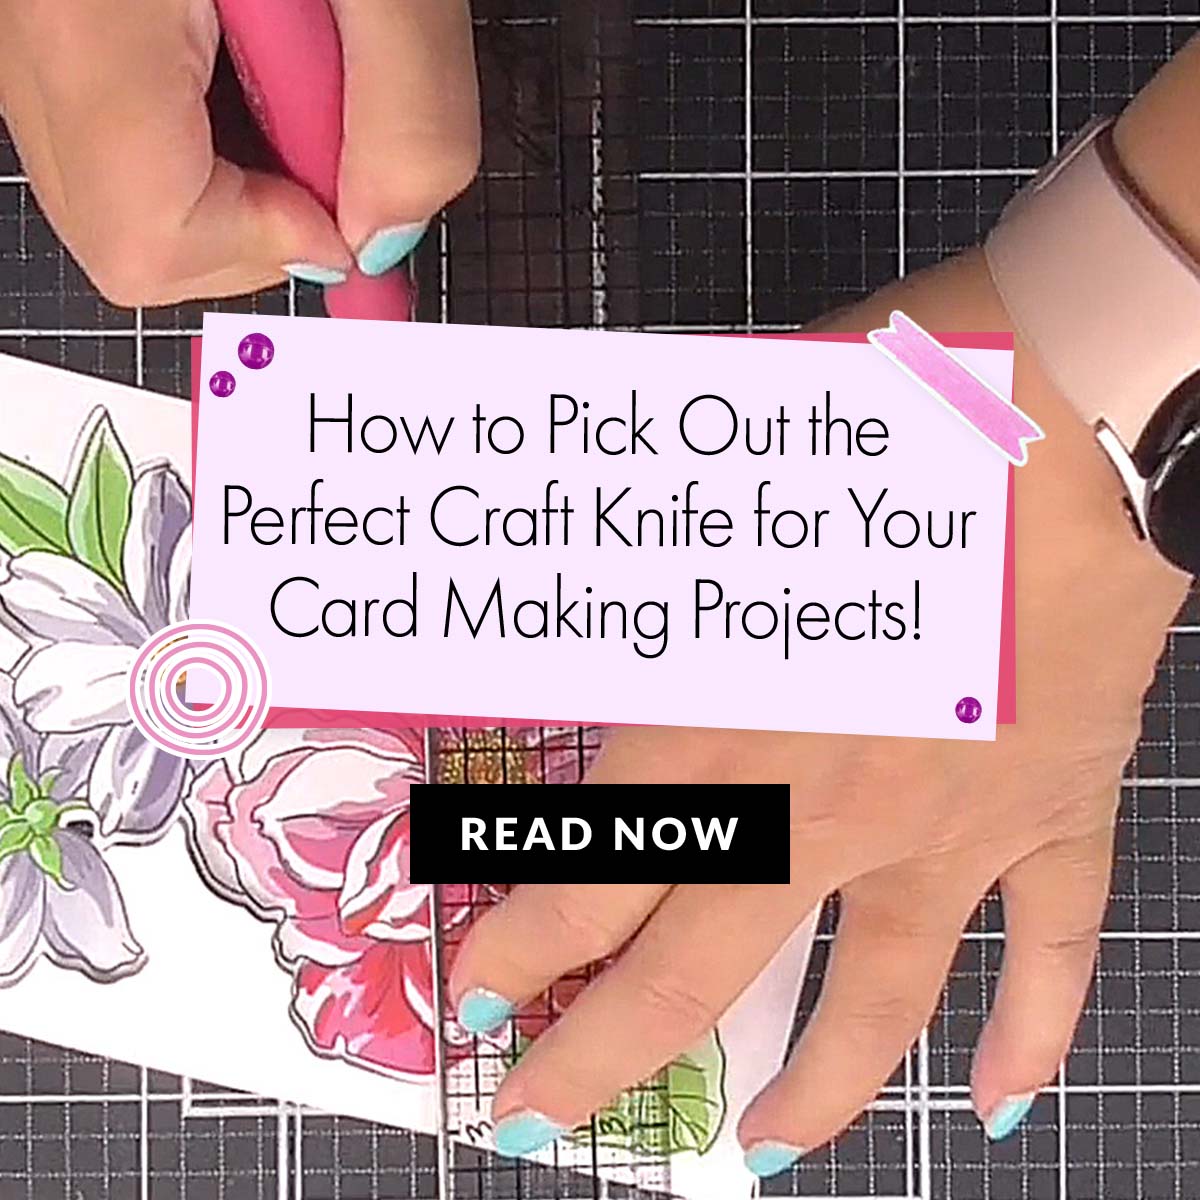 Crafting Essentials: Finding the Perfect Craft Knife for Card Making